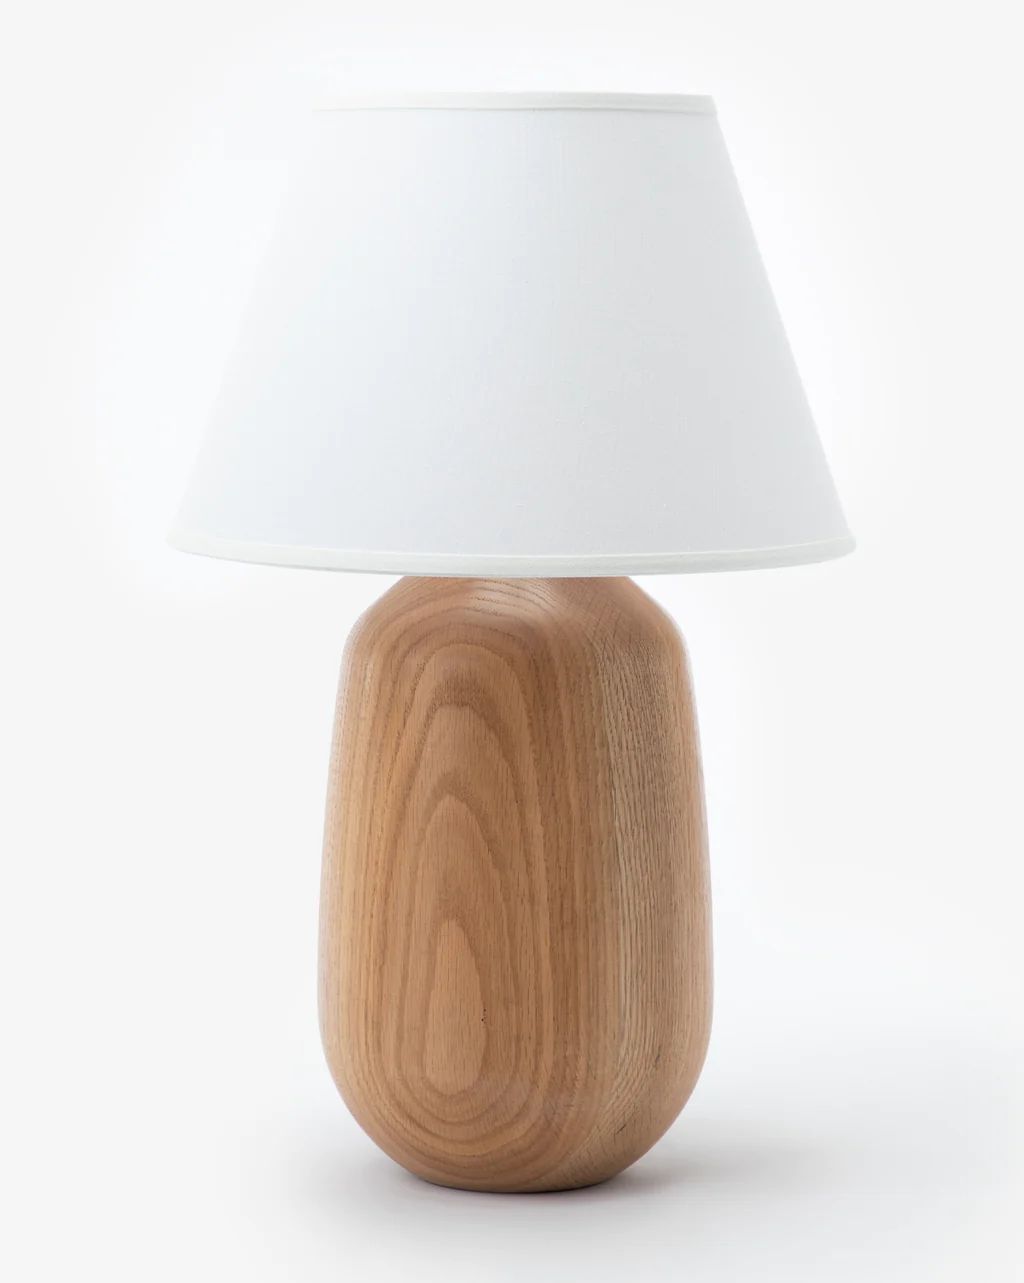 Percy Oak Table Lamp | McGee & Co.